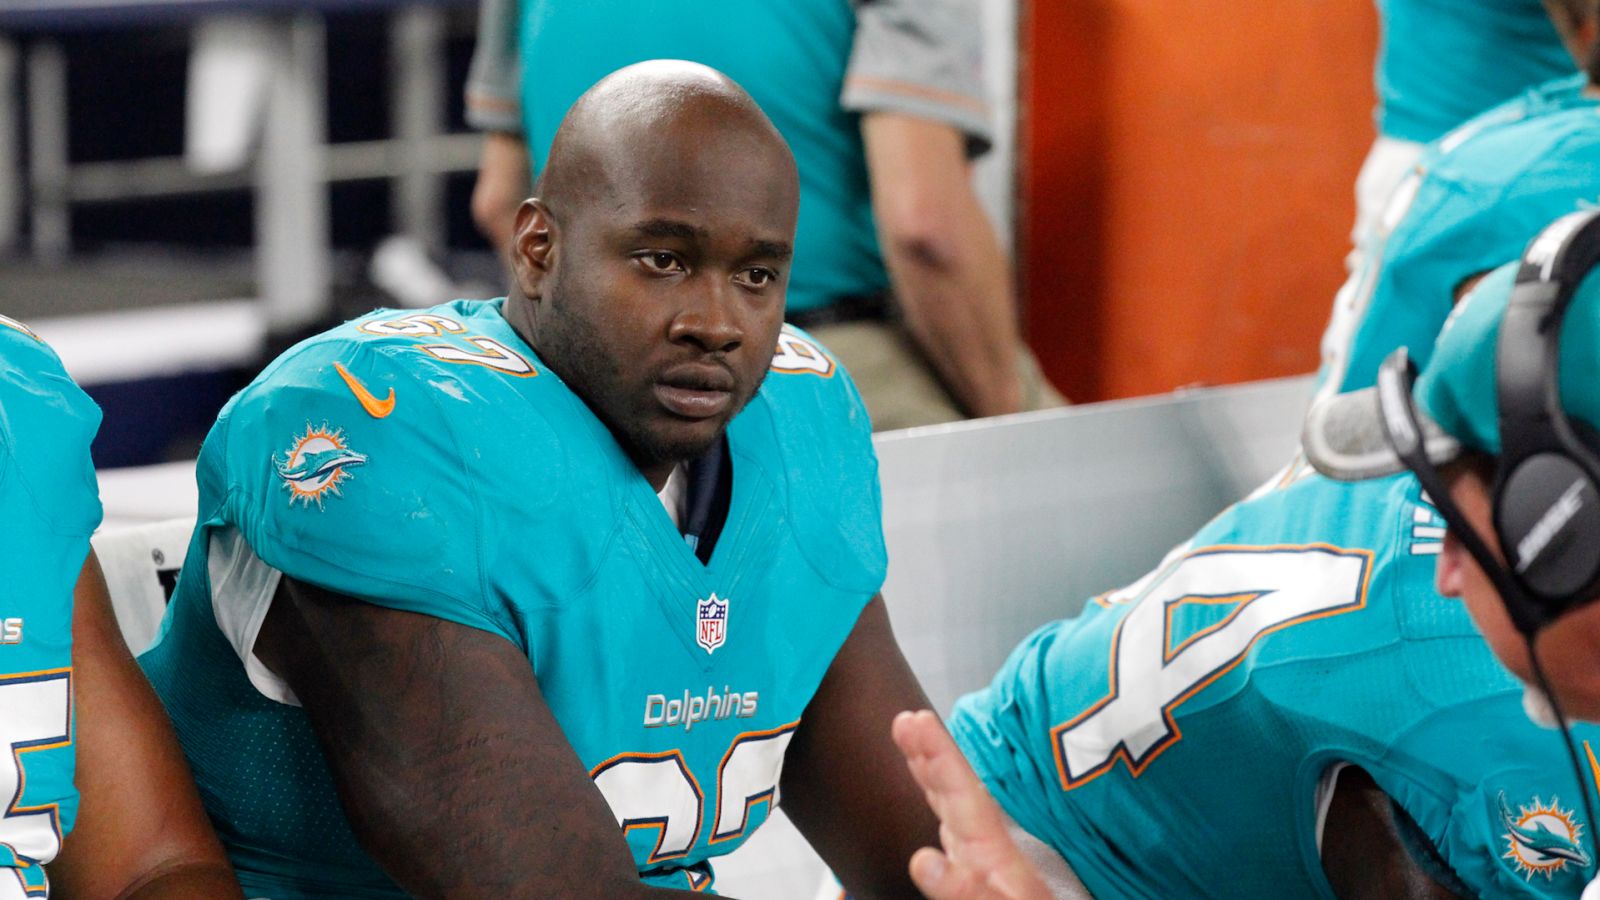 Laremy Tunsil is expected to be an elite pass blocker